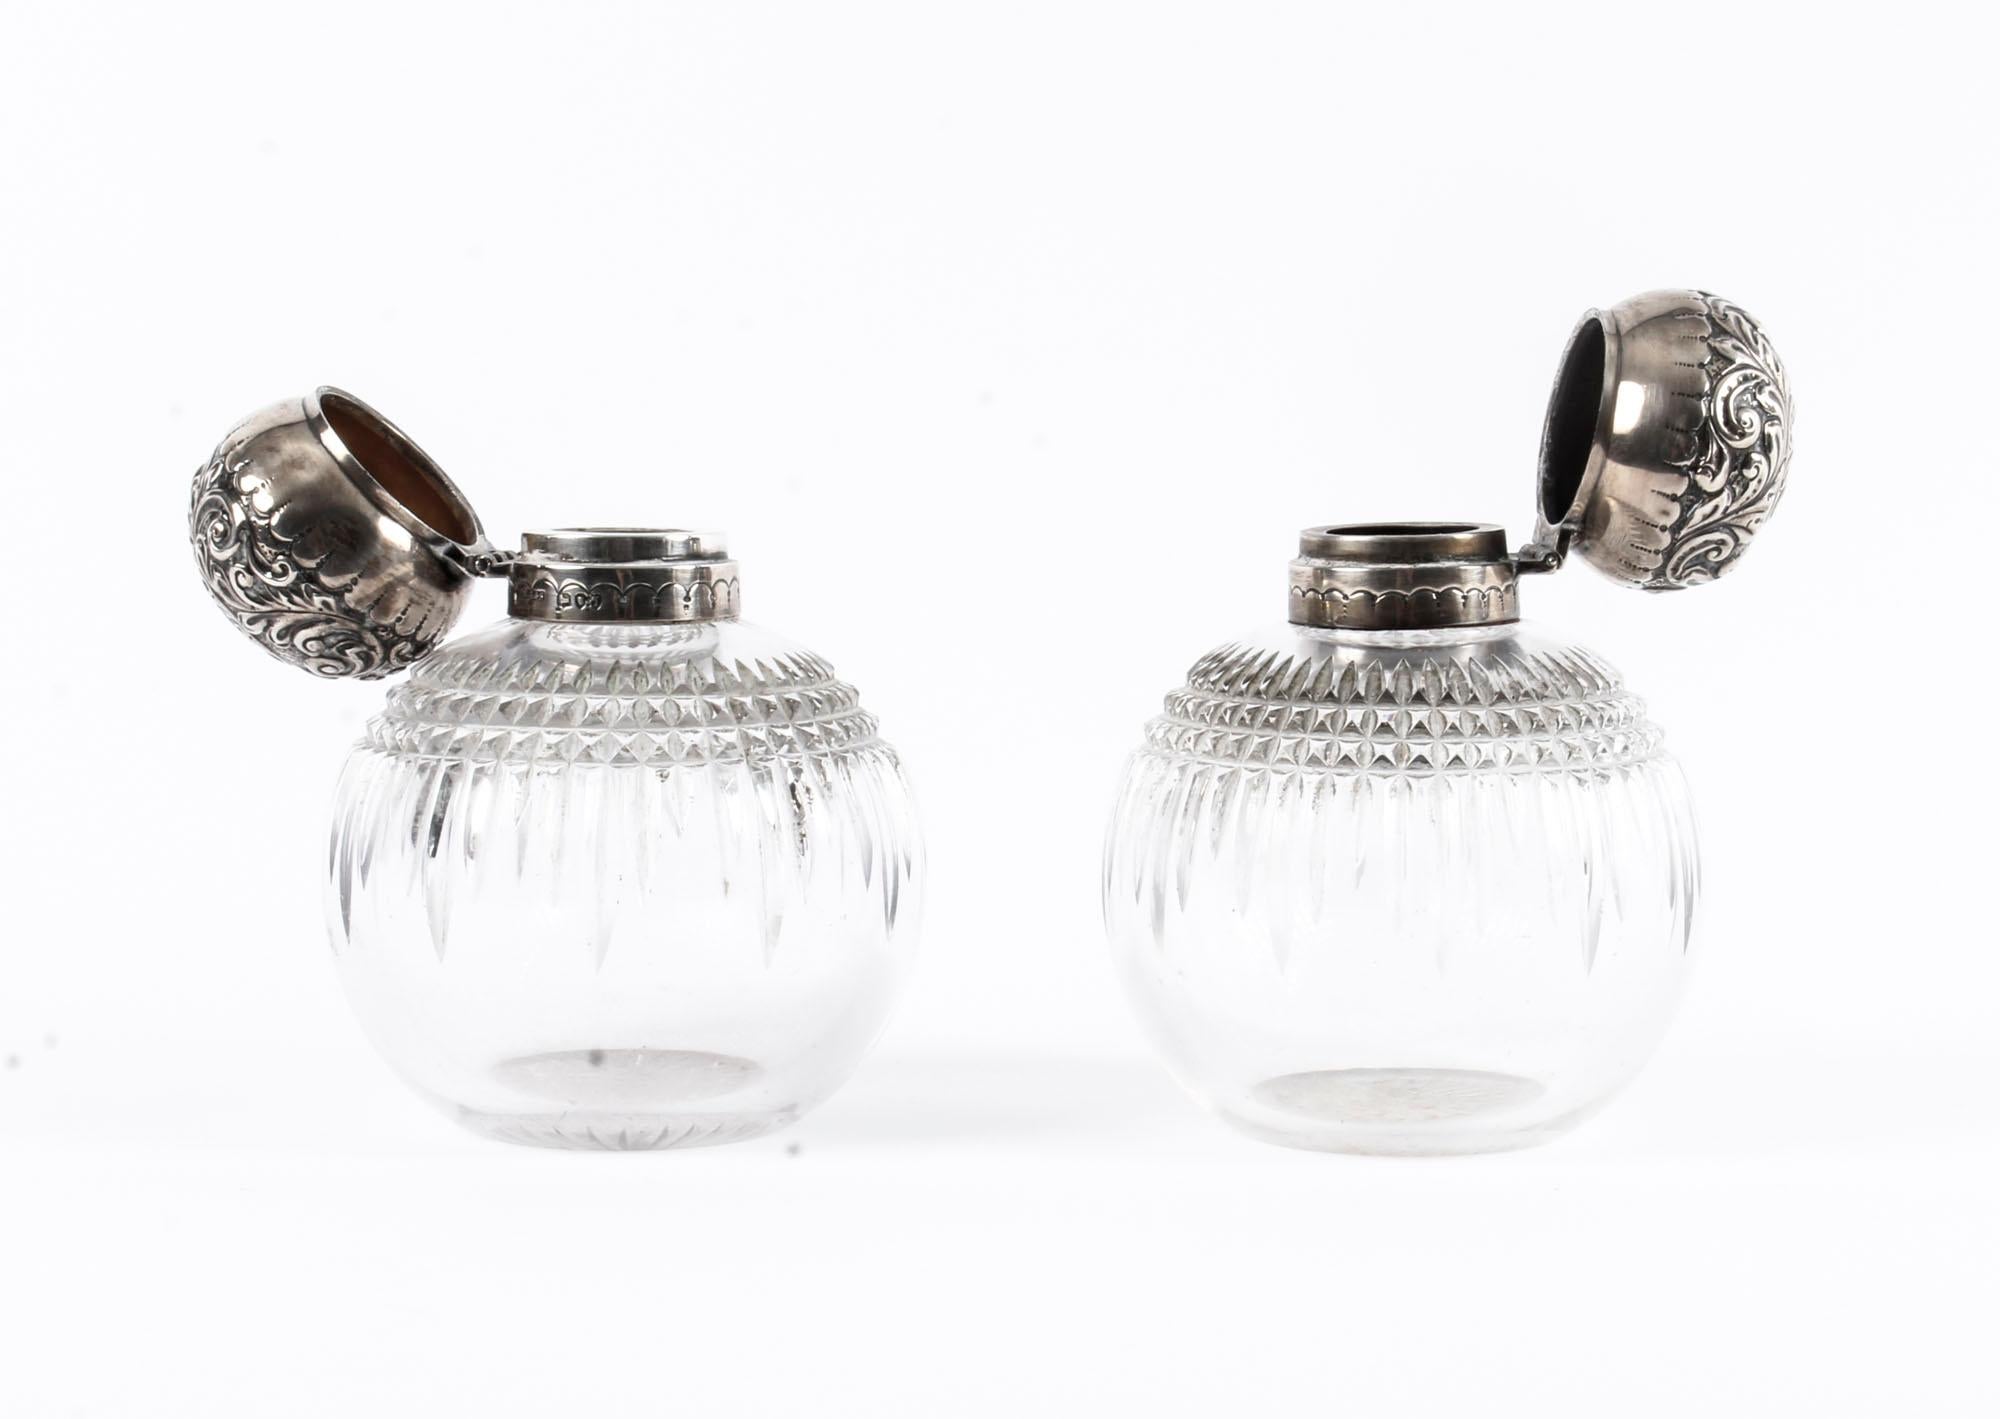 This is an exquisitely sophisticated and rare pair of Antique Victorian sterling silver top and clear cut crystal scent bottles, by the renowned silversmiths John Grinsell & Sons of London, 1894 in date.

Each bottle features a distinctive